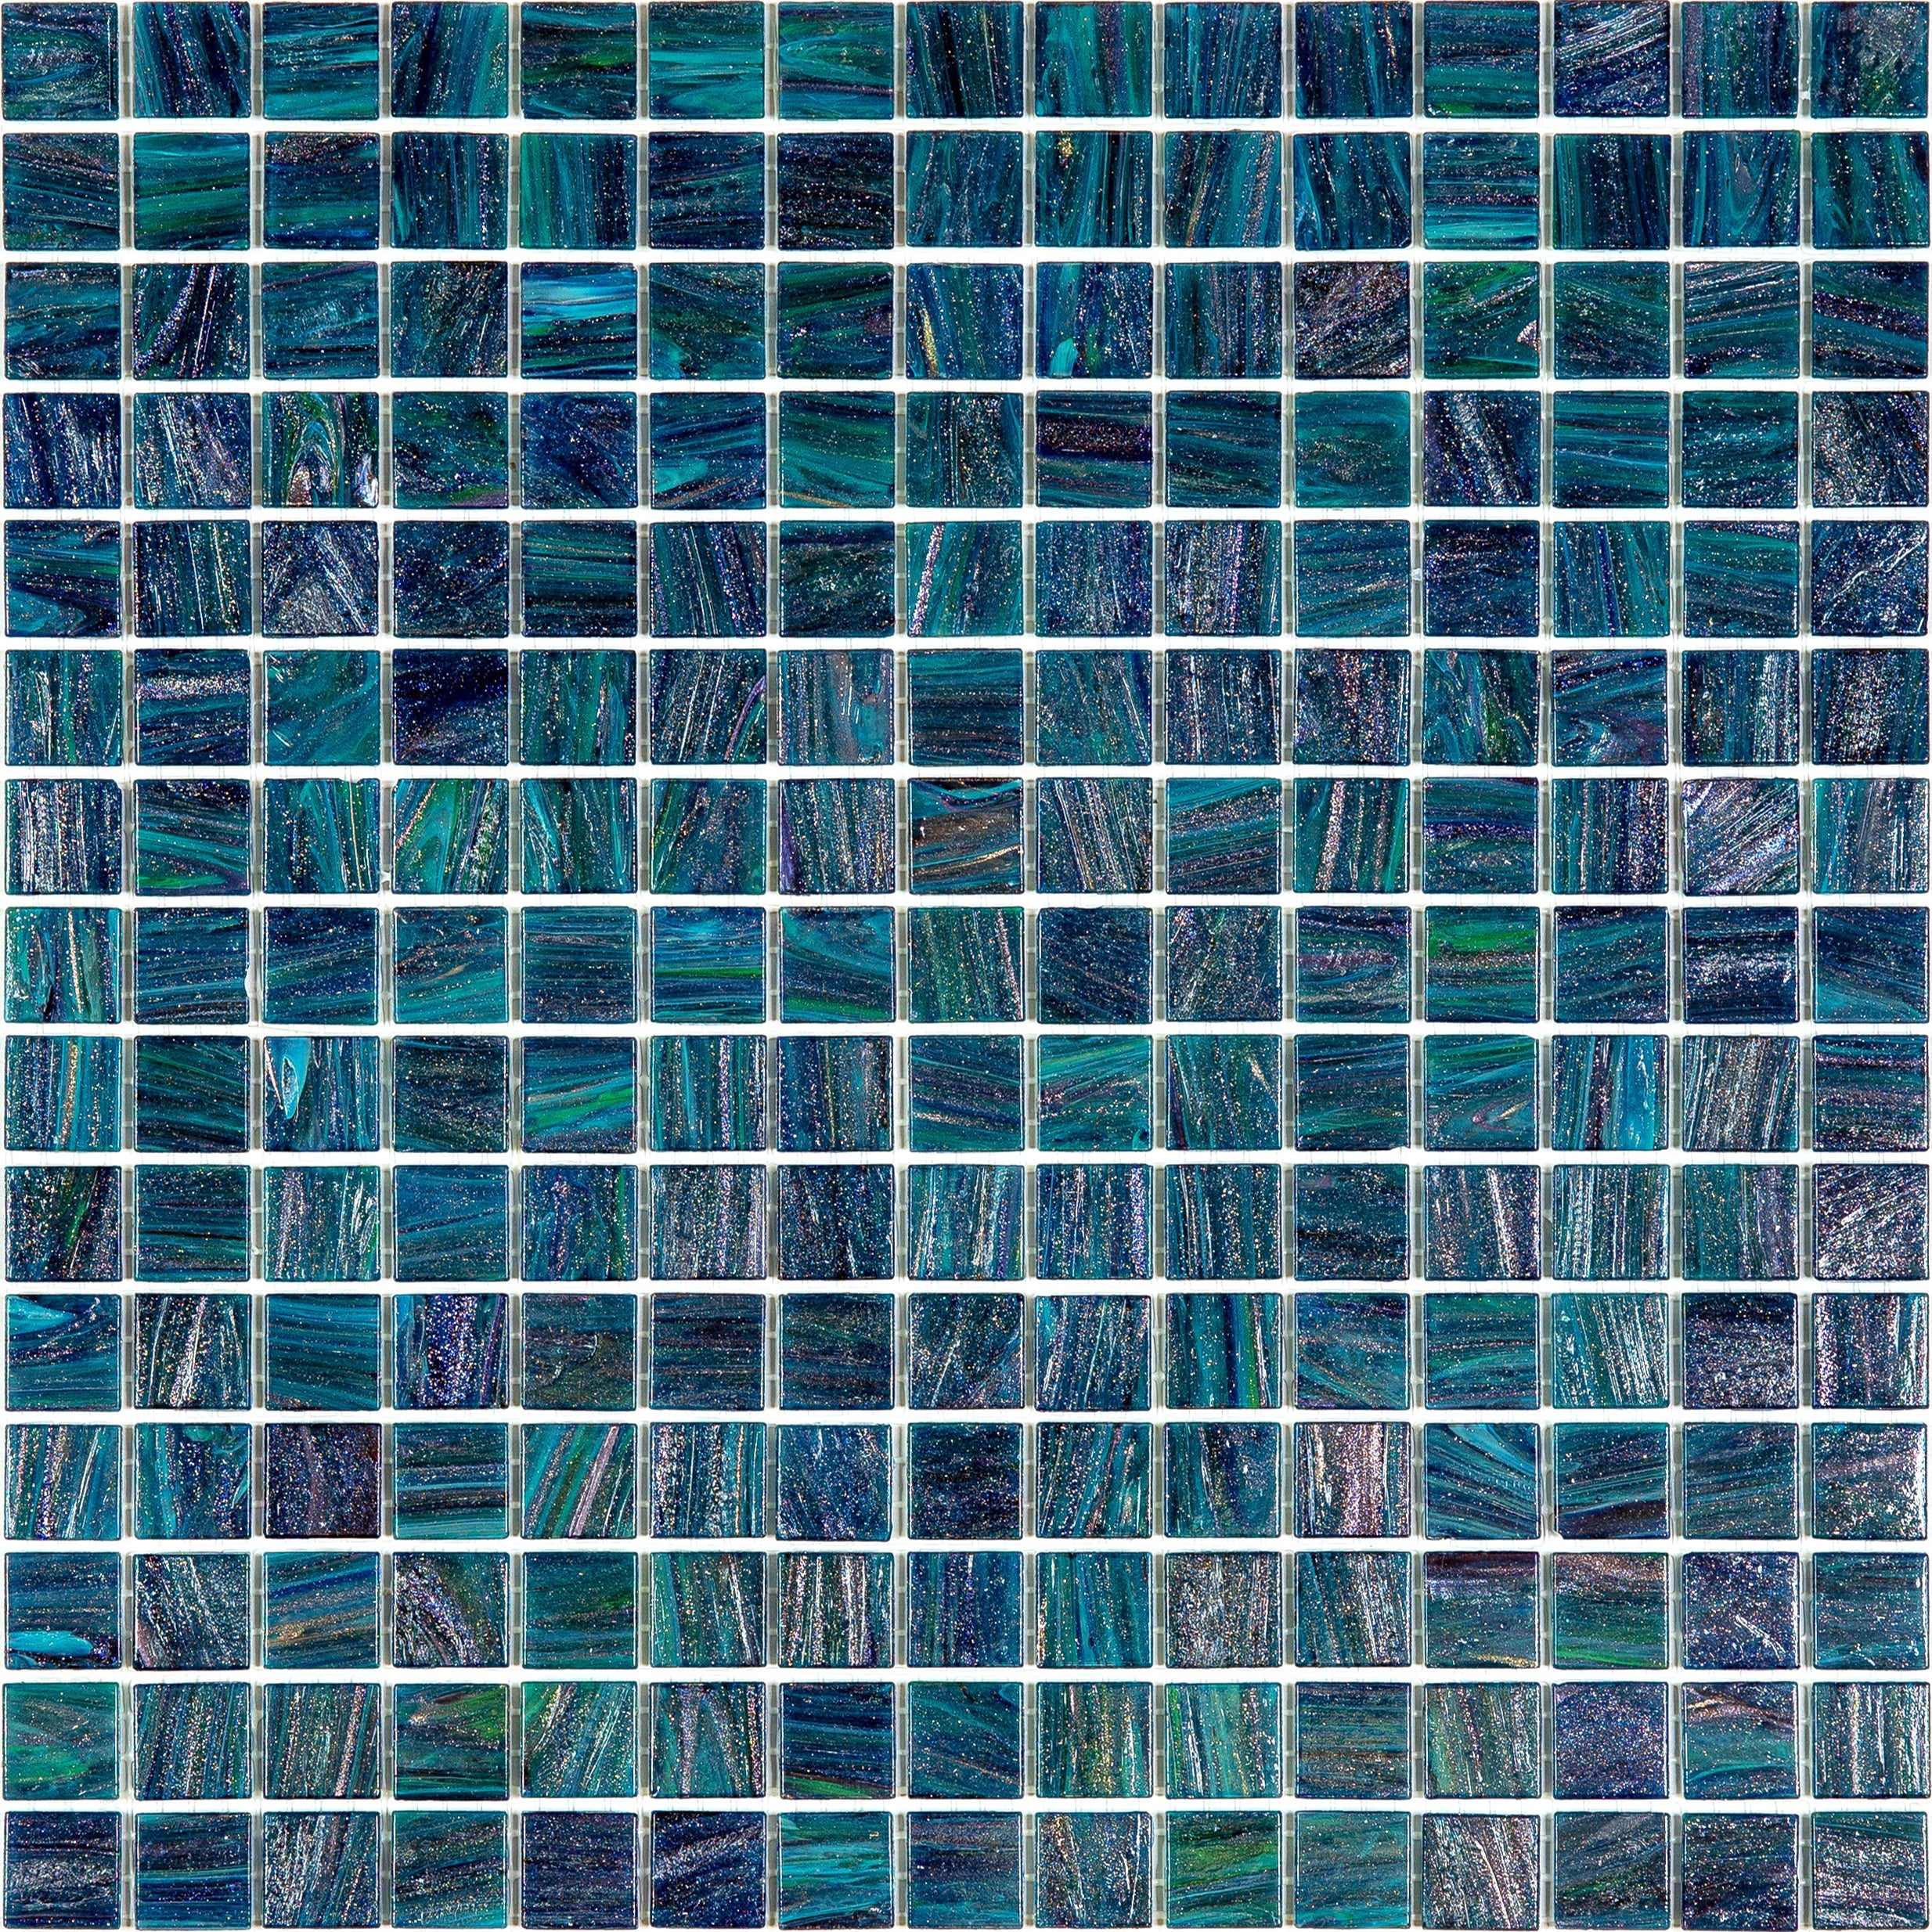 mir alma solid colors 0_8 inch stella ste57 wall and floor mosaic distributed by surface group natural materials